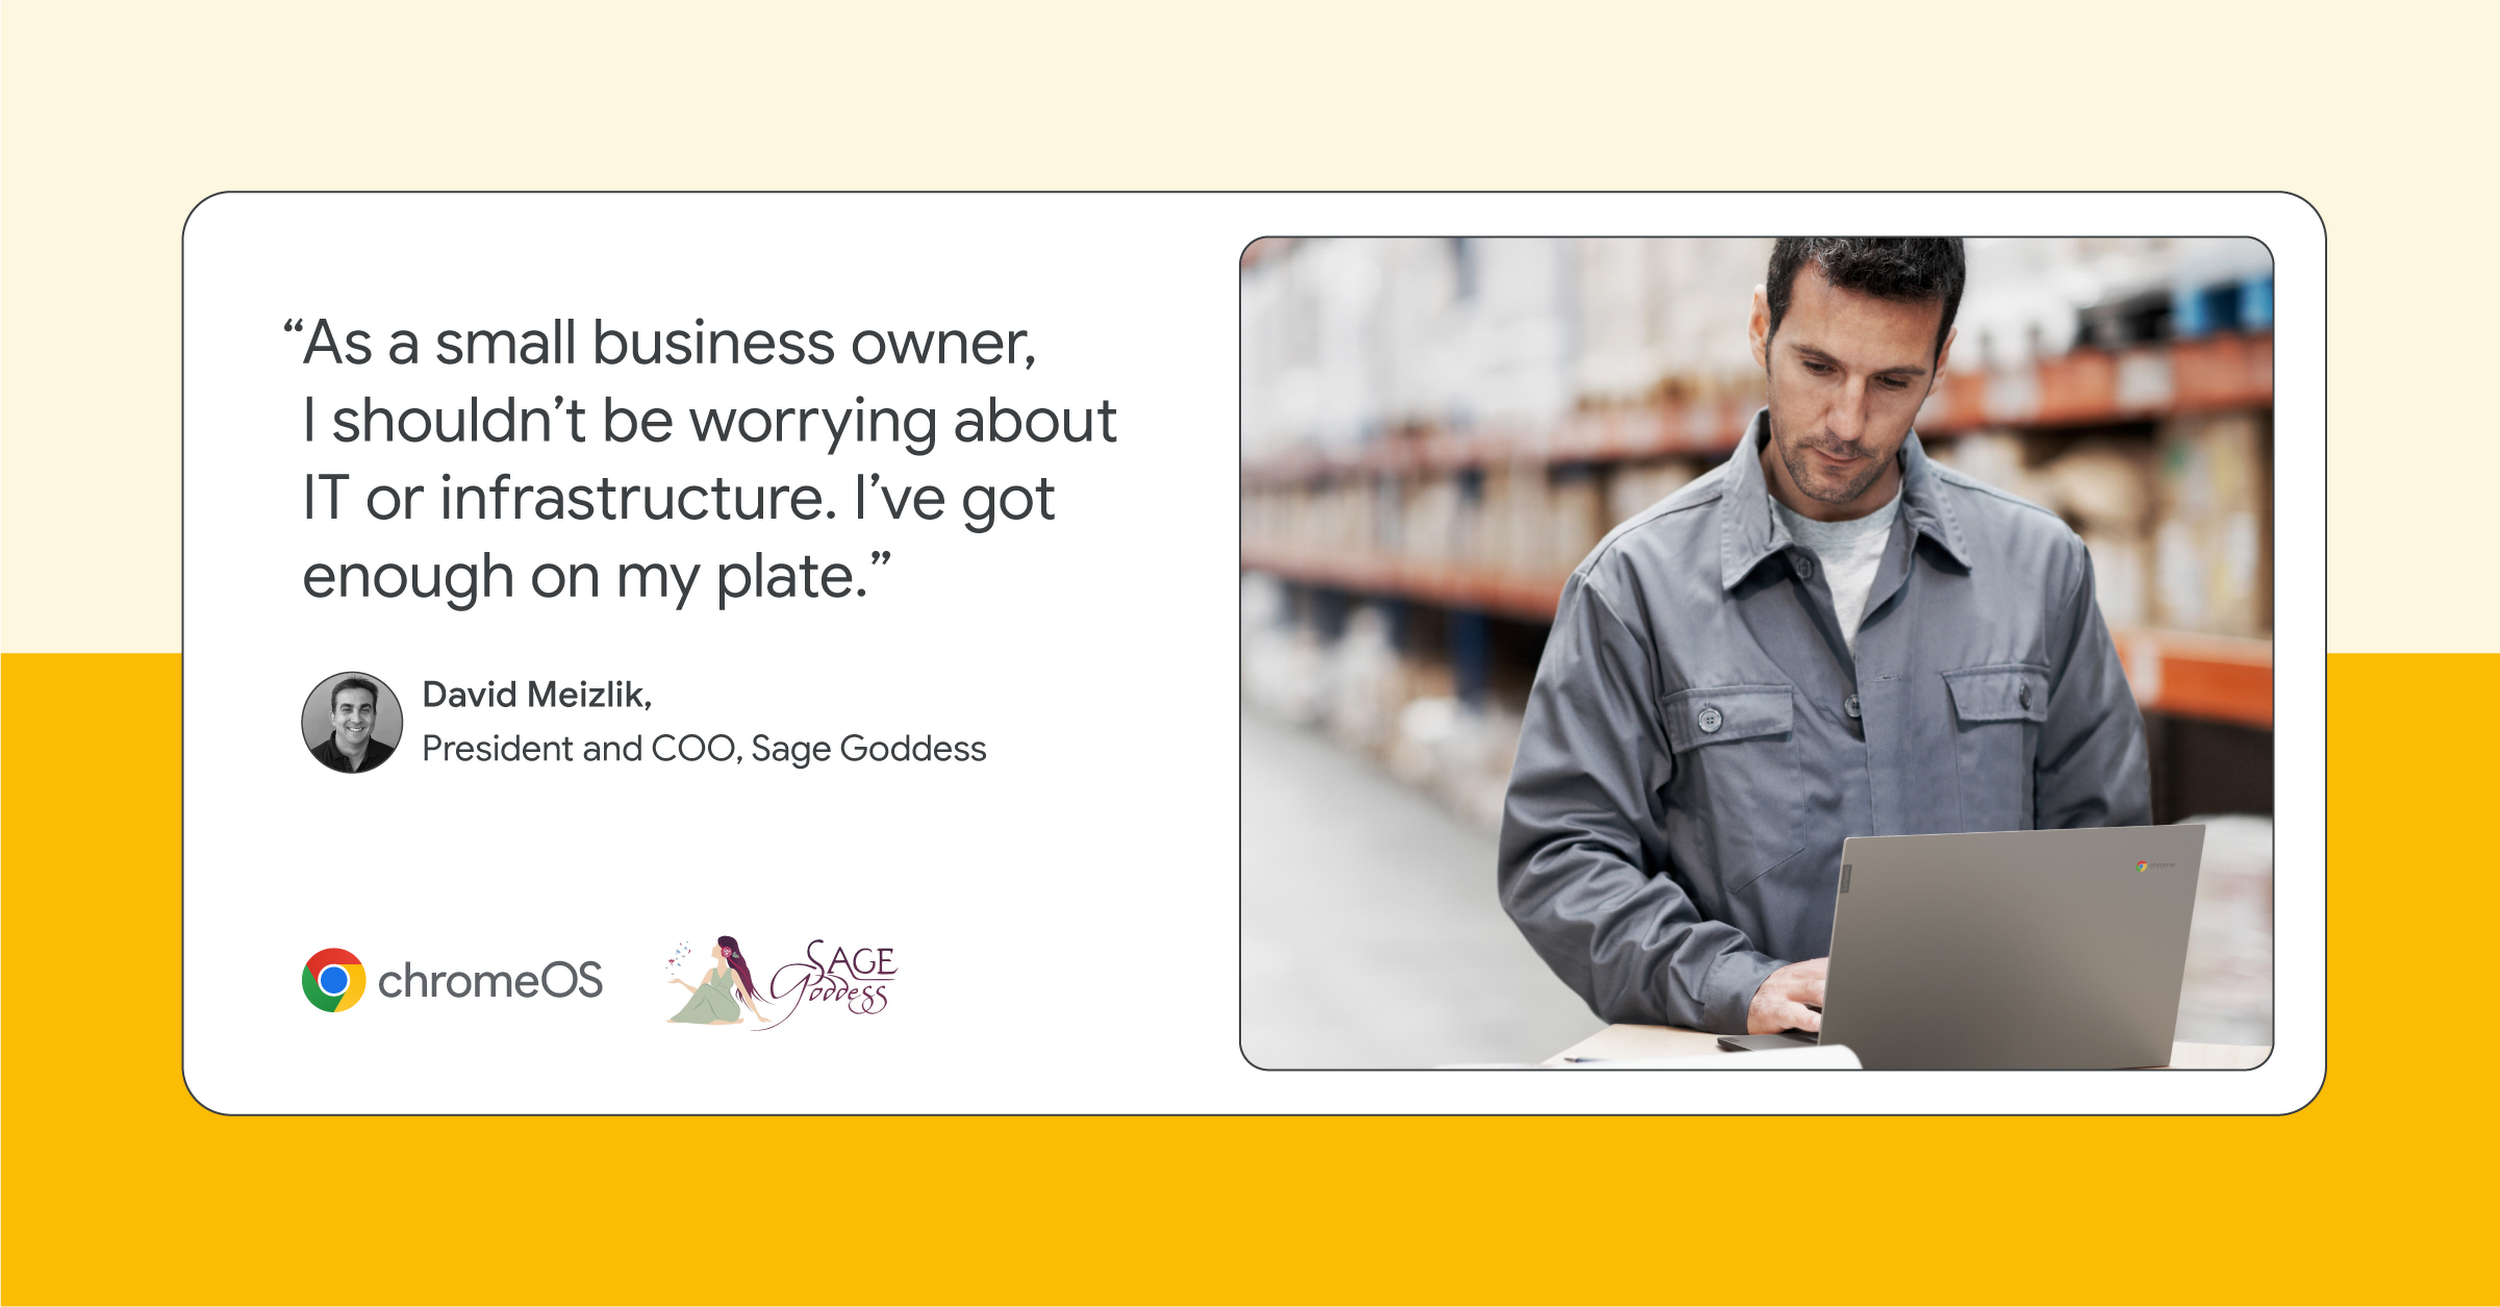 Sage Goddess grows its well-being business with ChromeOS